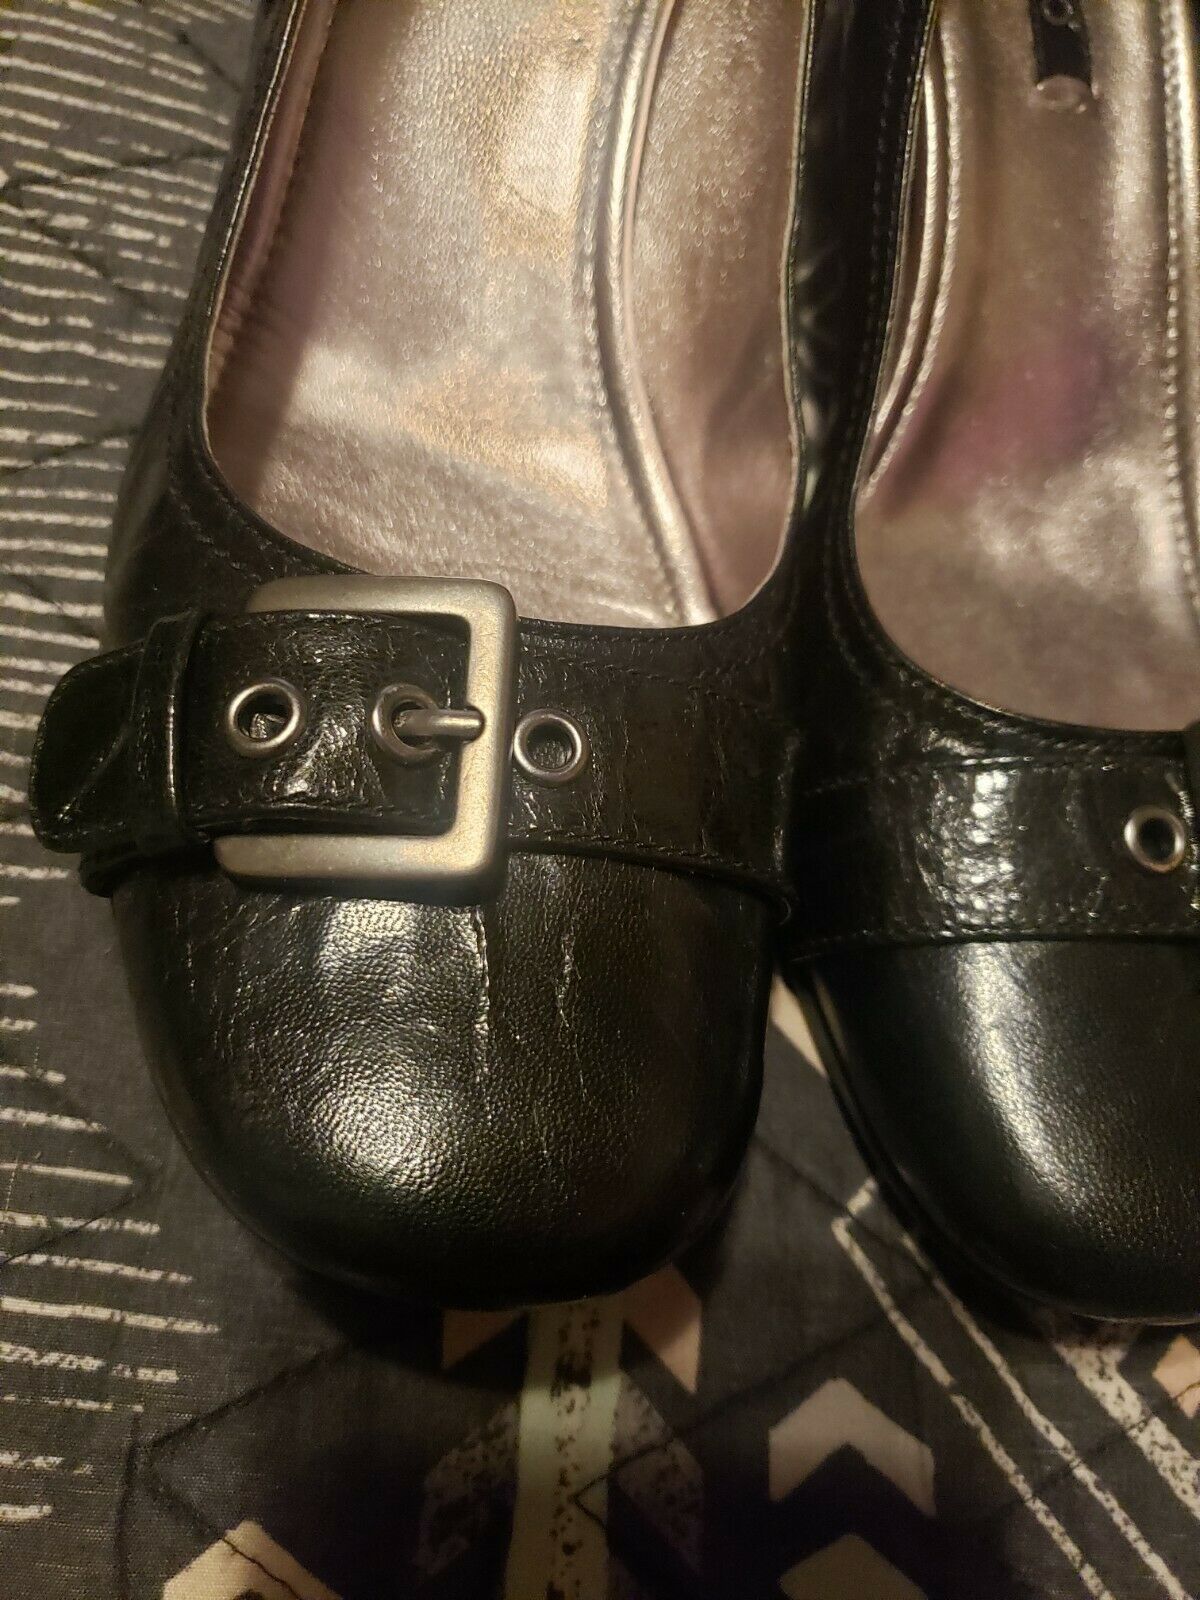 Ecco Black Dress Shoes With Heels Buckle Across Toe Size 41 US size 10.5